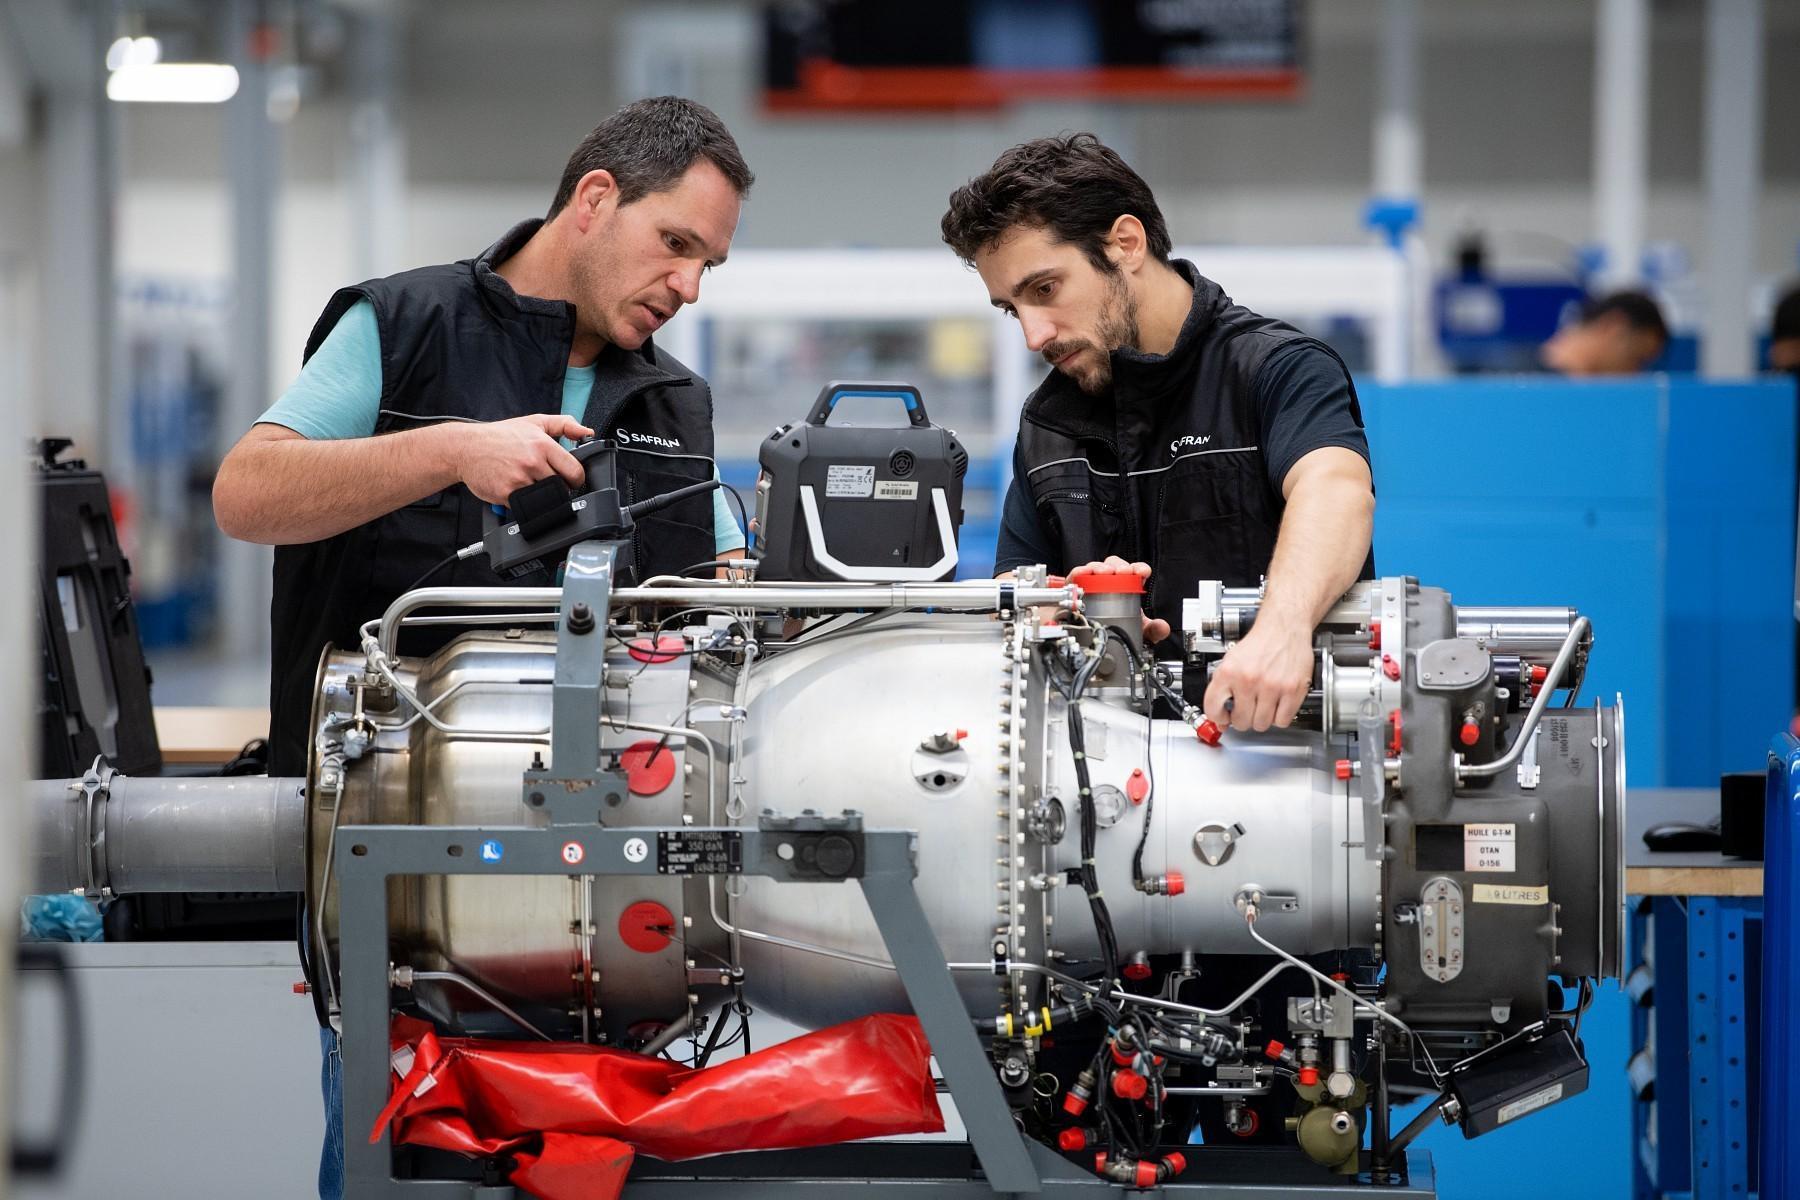  The RMAF has extended its contract for Makila 2A engine support with Safran Helicopter Engines and Global Turbine Asia (GTA)